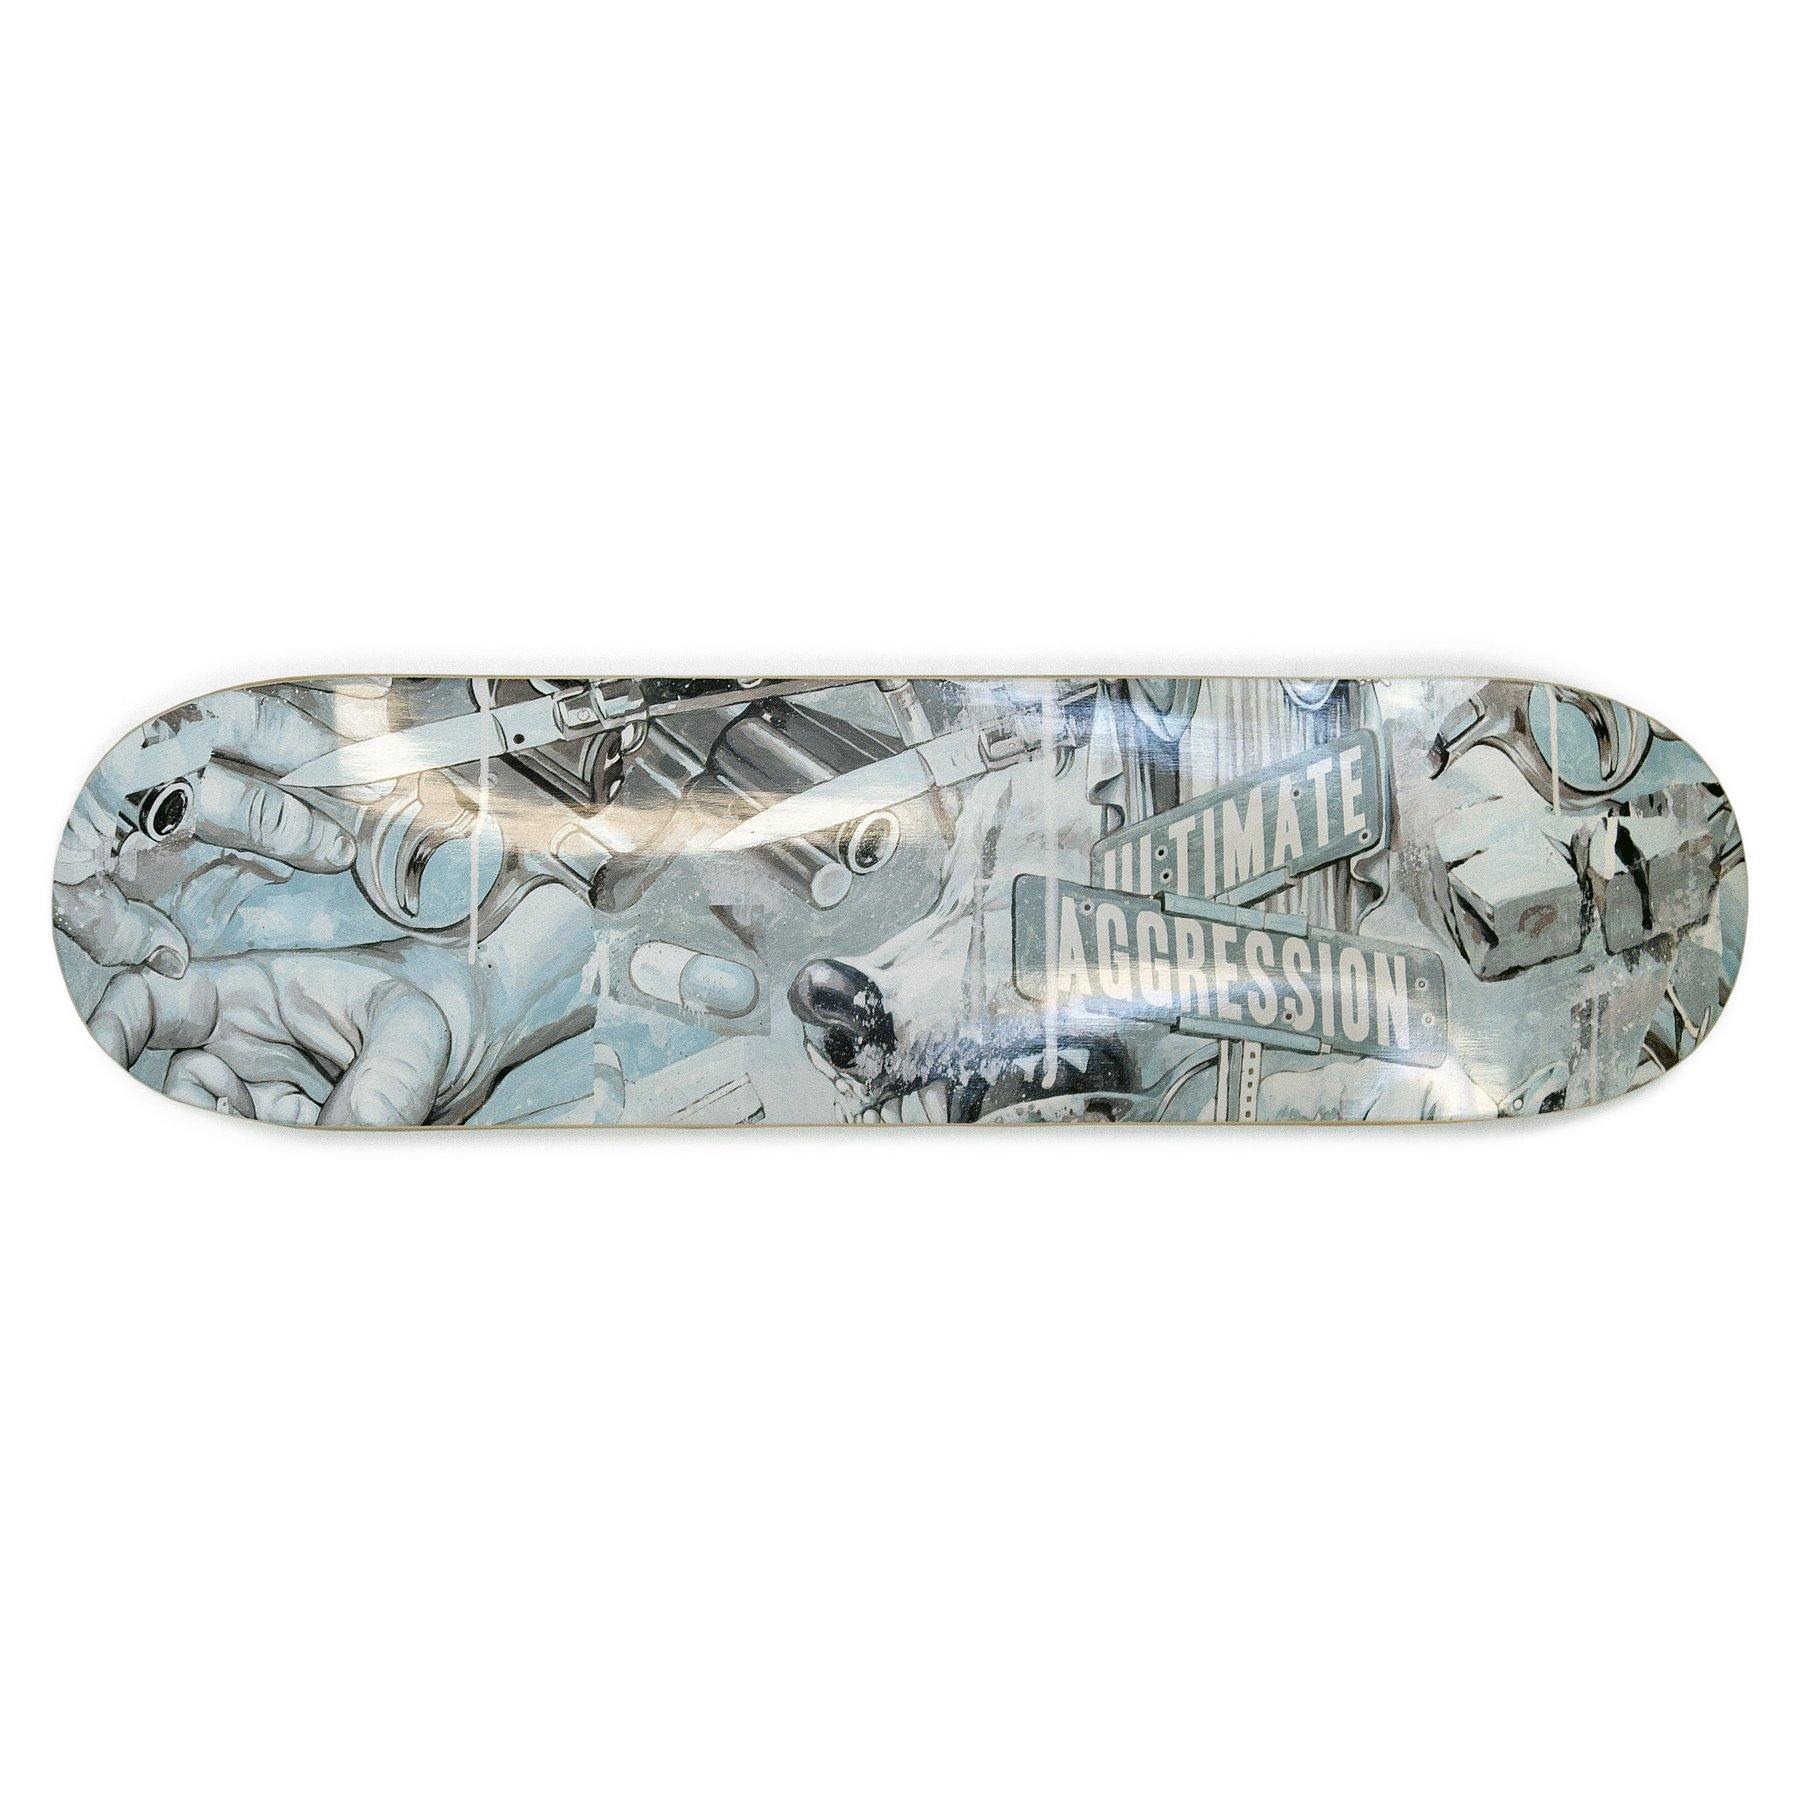 Buy – Year of The Knife "Ultimate Aggression" Skate Deck – Band & Music Merch – Cold Cuts Merch